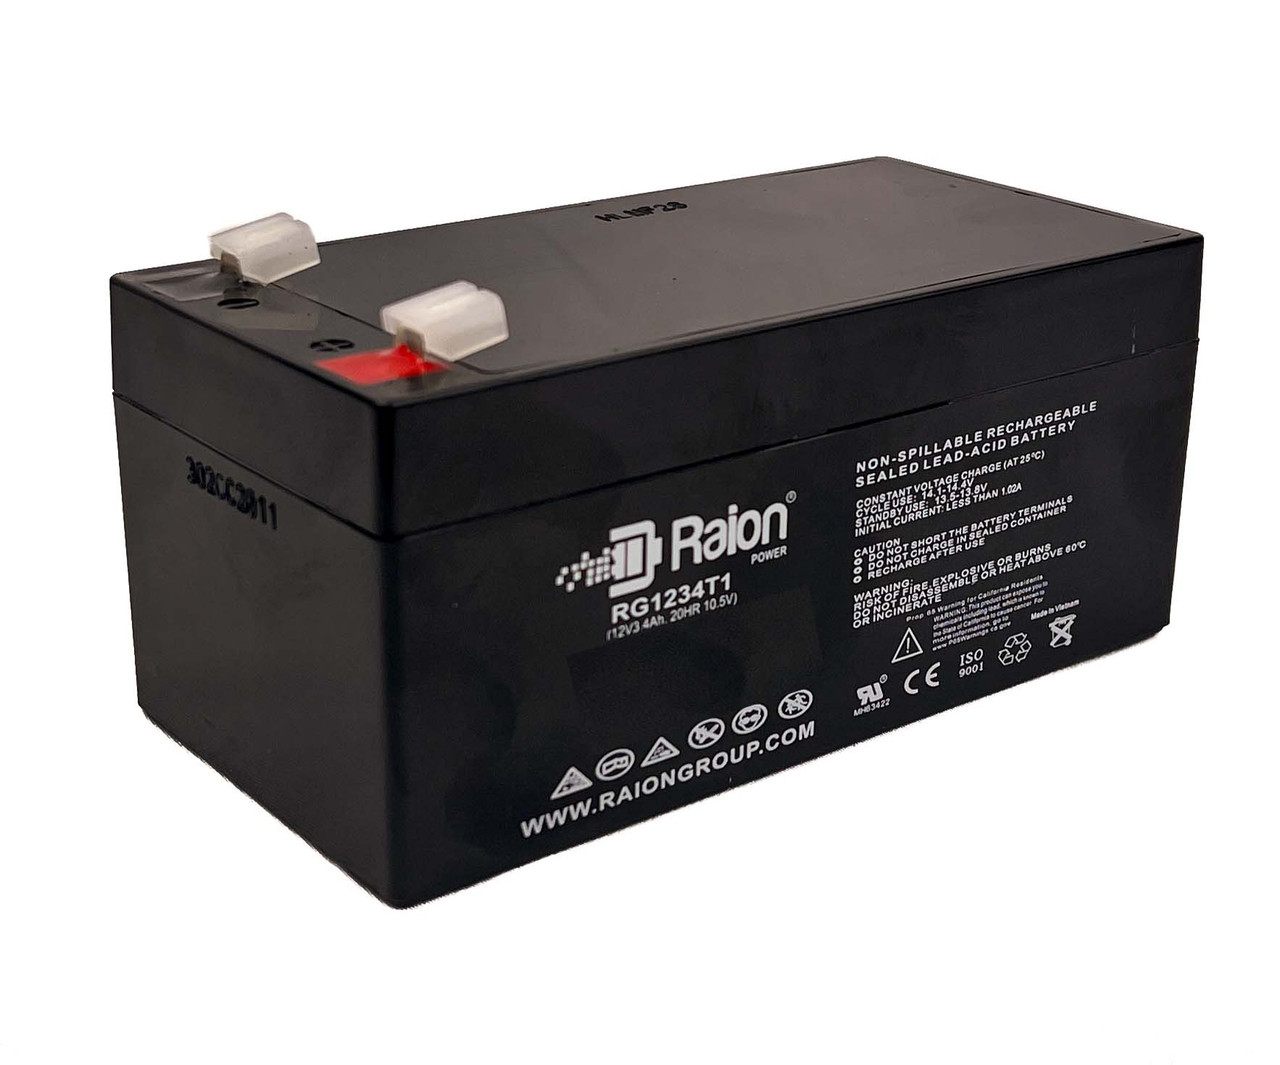 Raion Power 12V 3.4Ah Non-Spillable Replacement Battery for Alexander GB1226